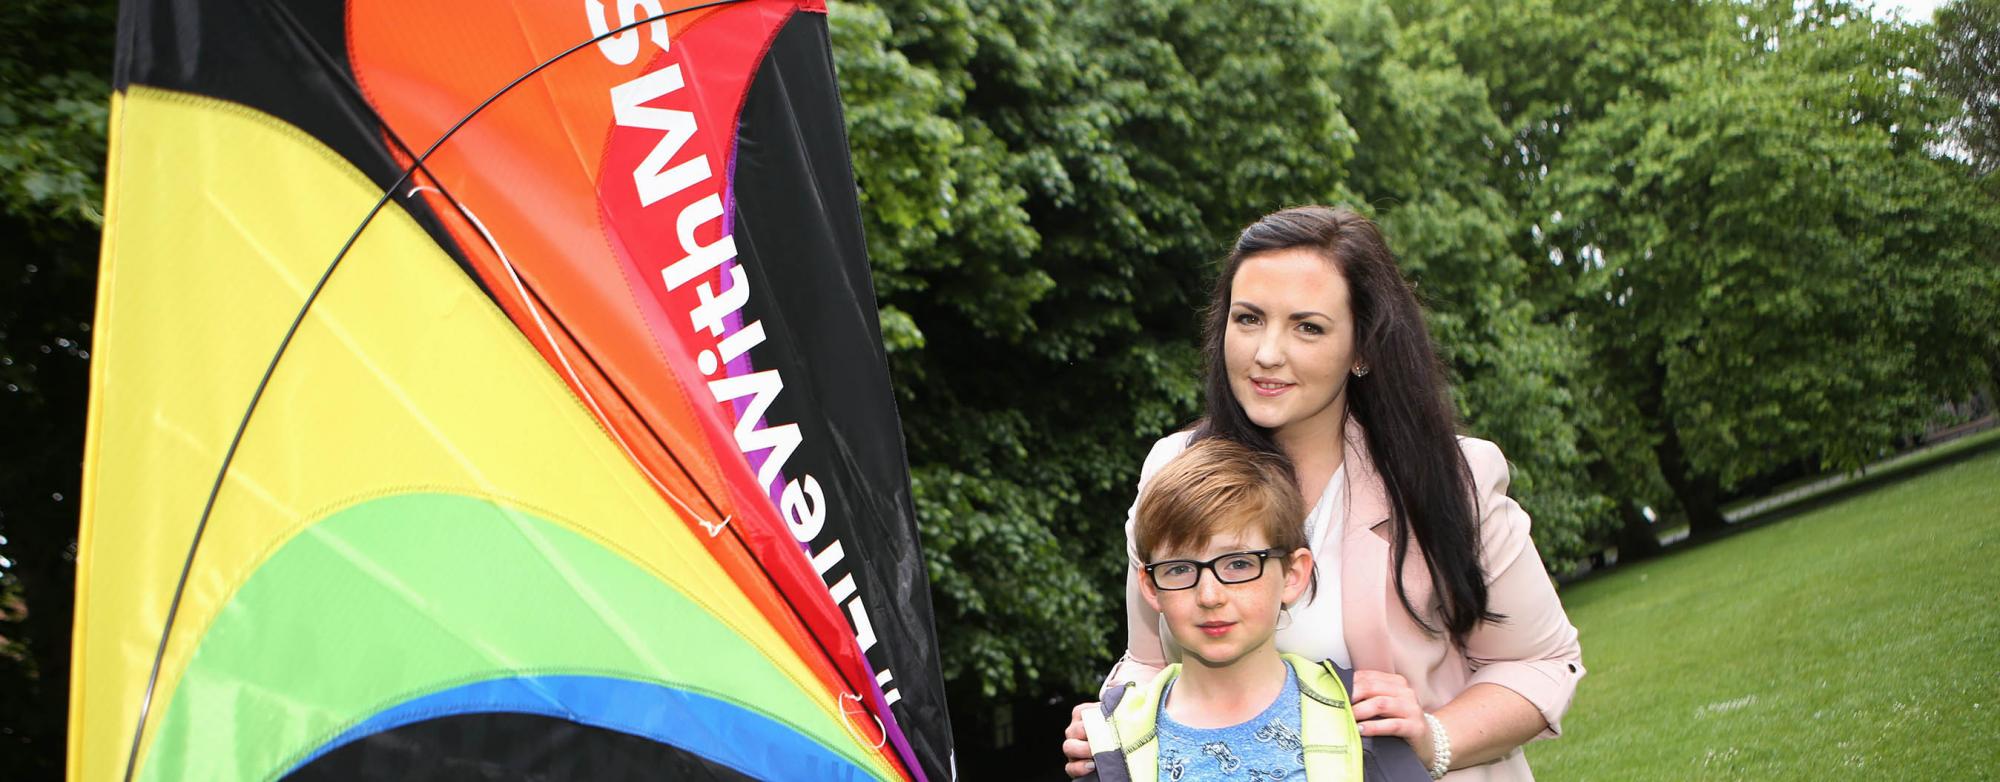 Photo of a mother with dark hair wearing a pink jacket and her son wearing black glasses, a blue t-shirt and dark jacket and holding a multicoloured kite in a park. t